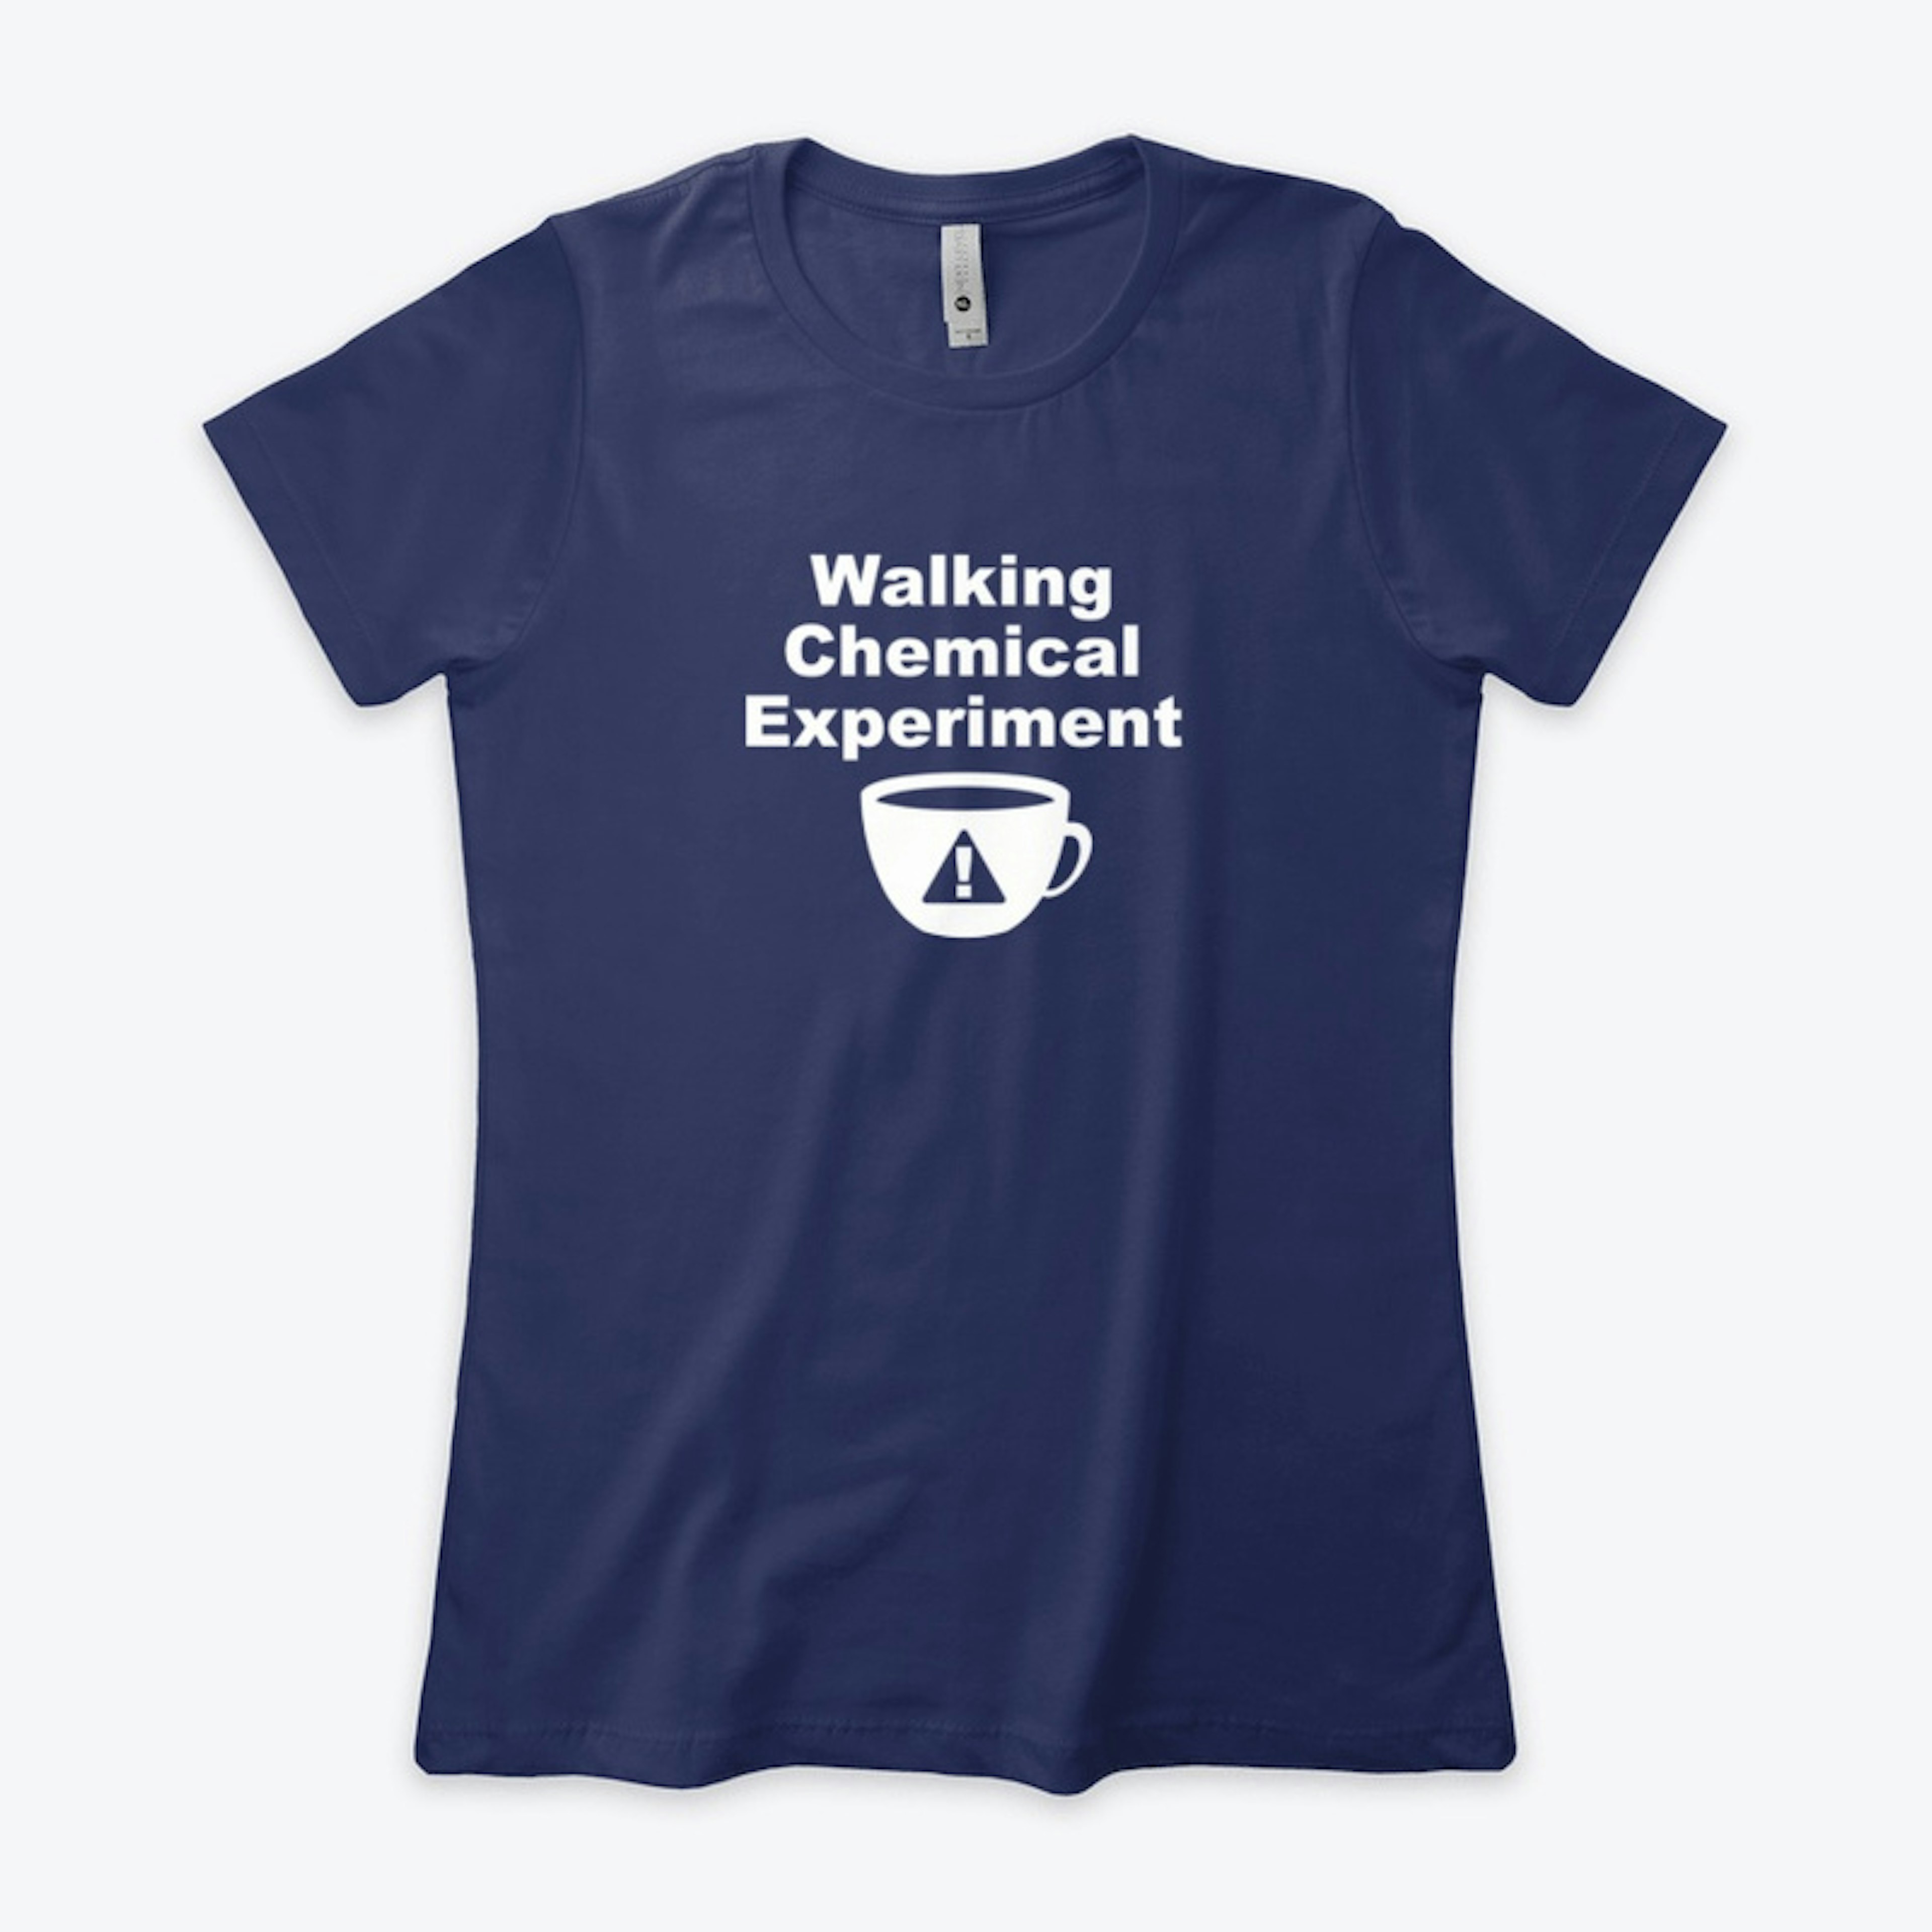 Walking Chemical Experiment